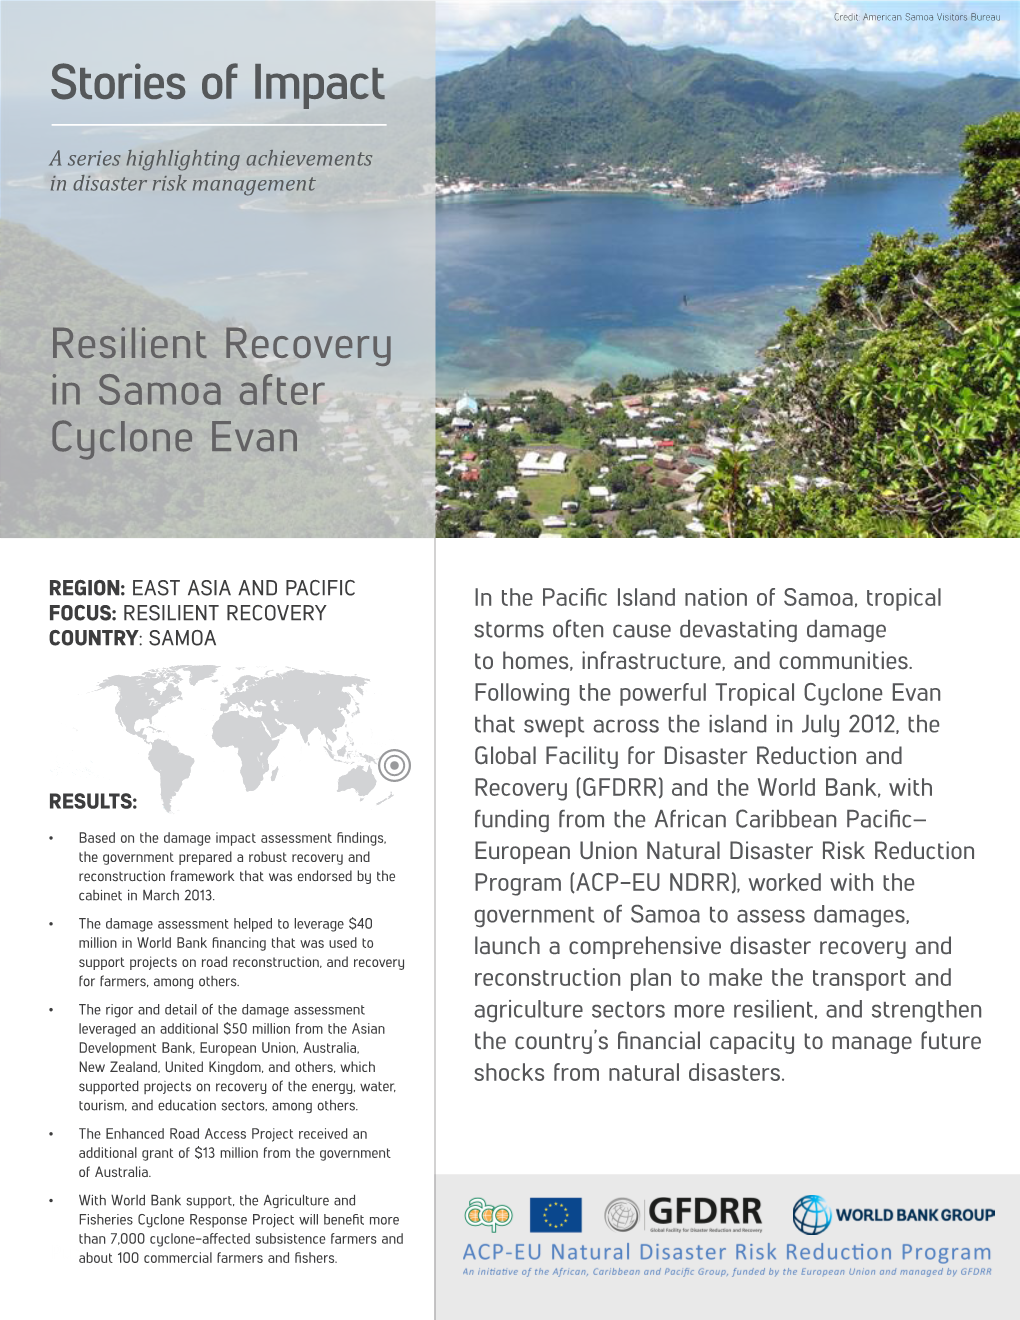 Resilient Recovery in Samoa After Cyclone Evan